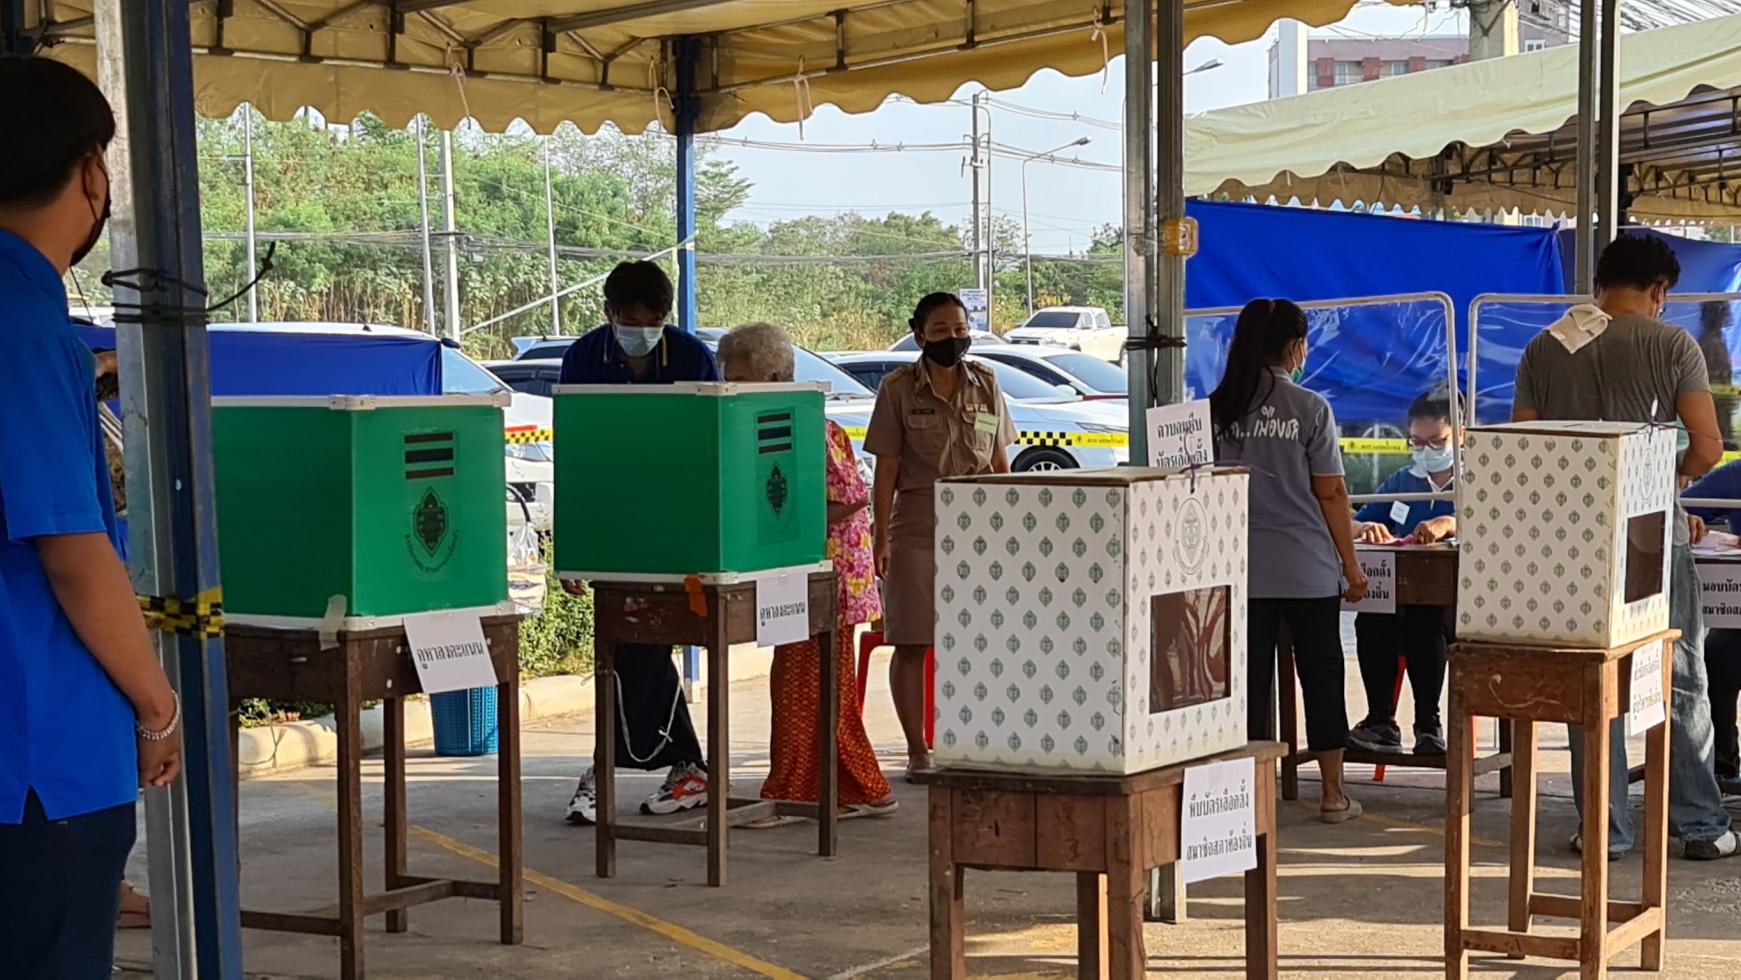 Thailand goes to the polls